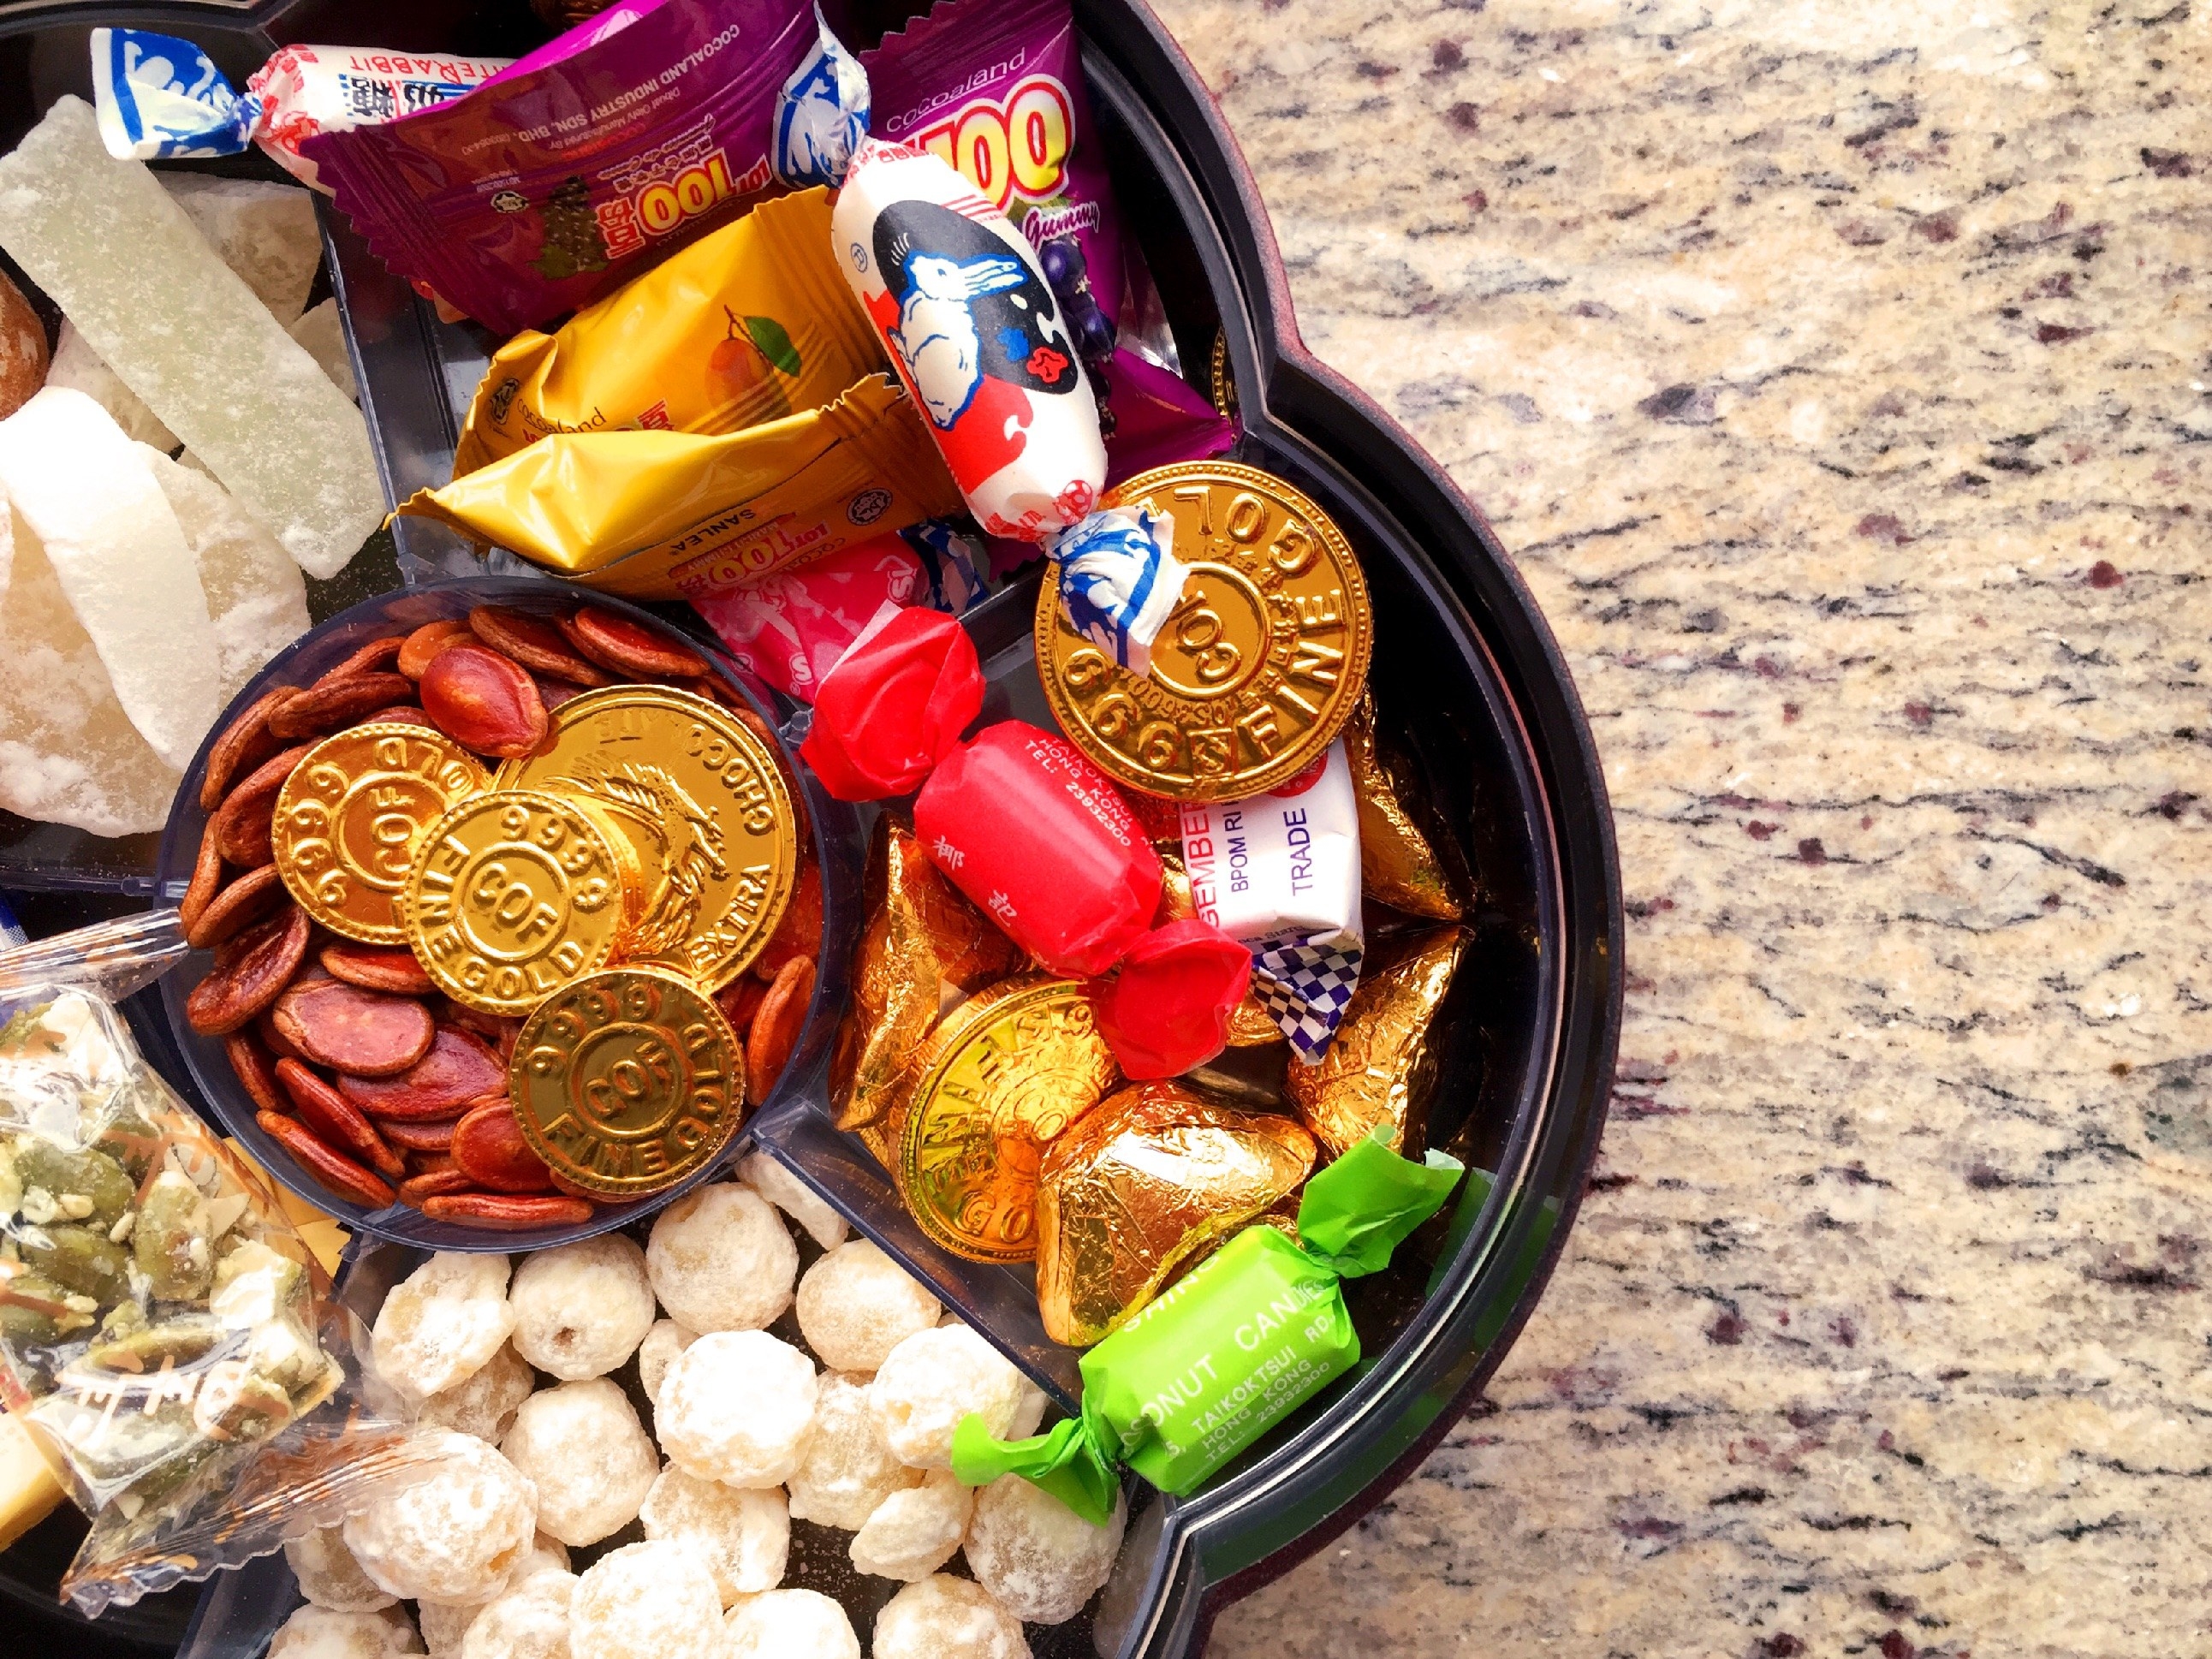 Closeup of a Tray of Togetherness that holds candy and other snacks